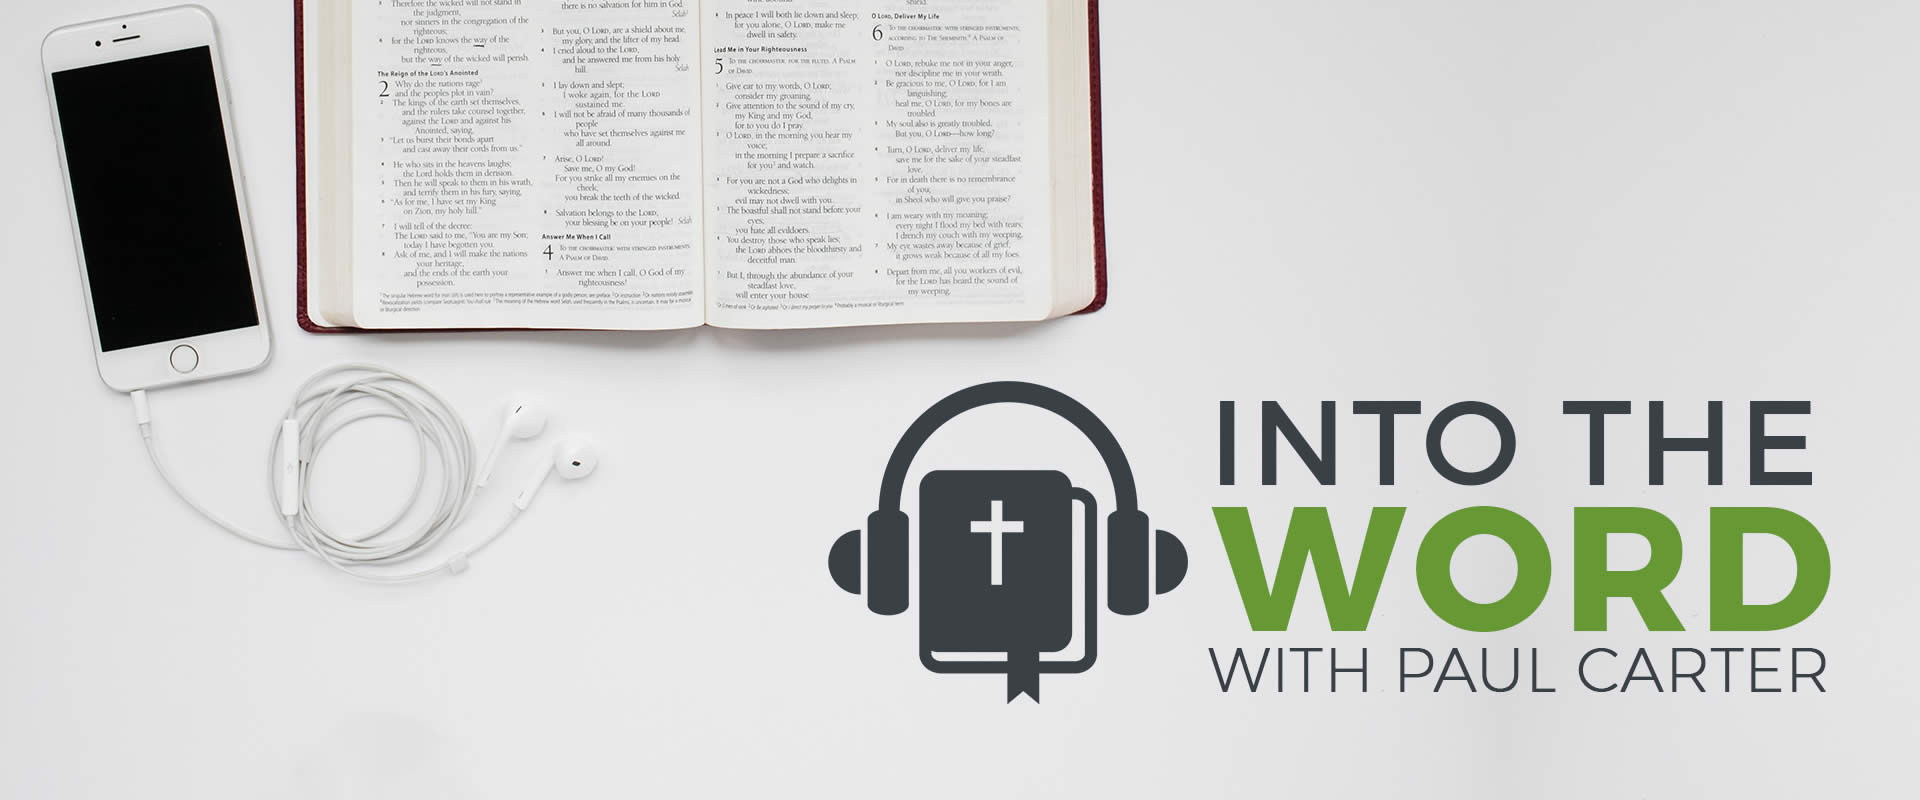 Into the Word is the online home of Paul Carter with Bible commentary via articles and audio episodes